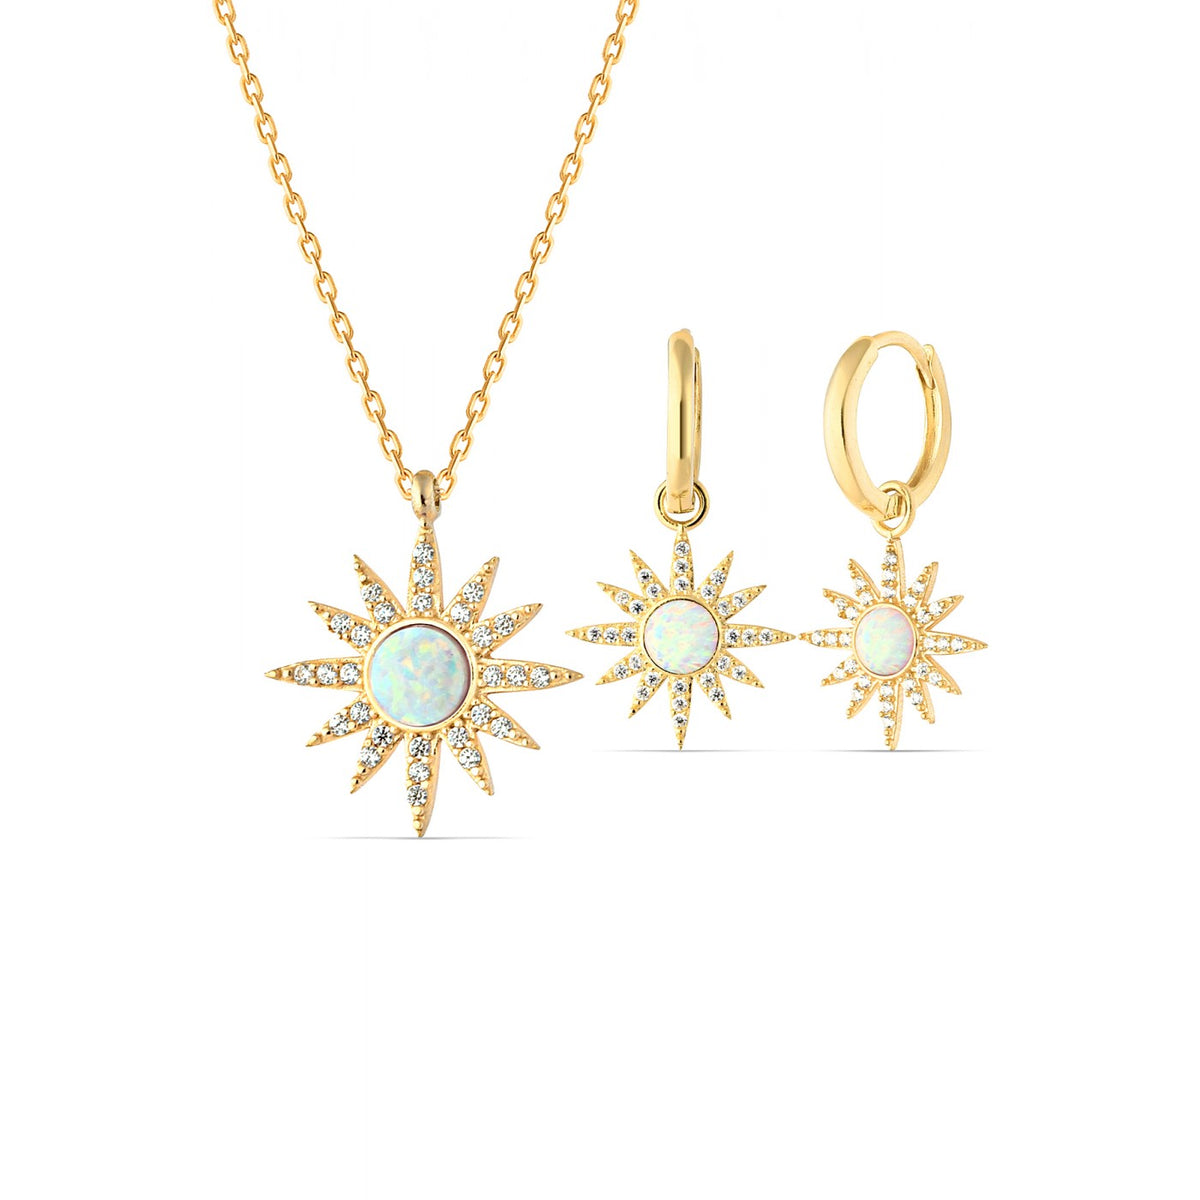 White Opal Sun Sterling Silver Necklace and Earring Set